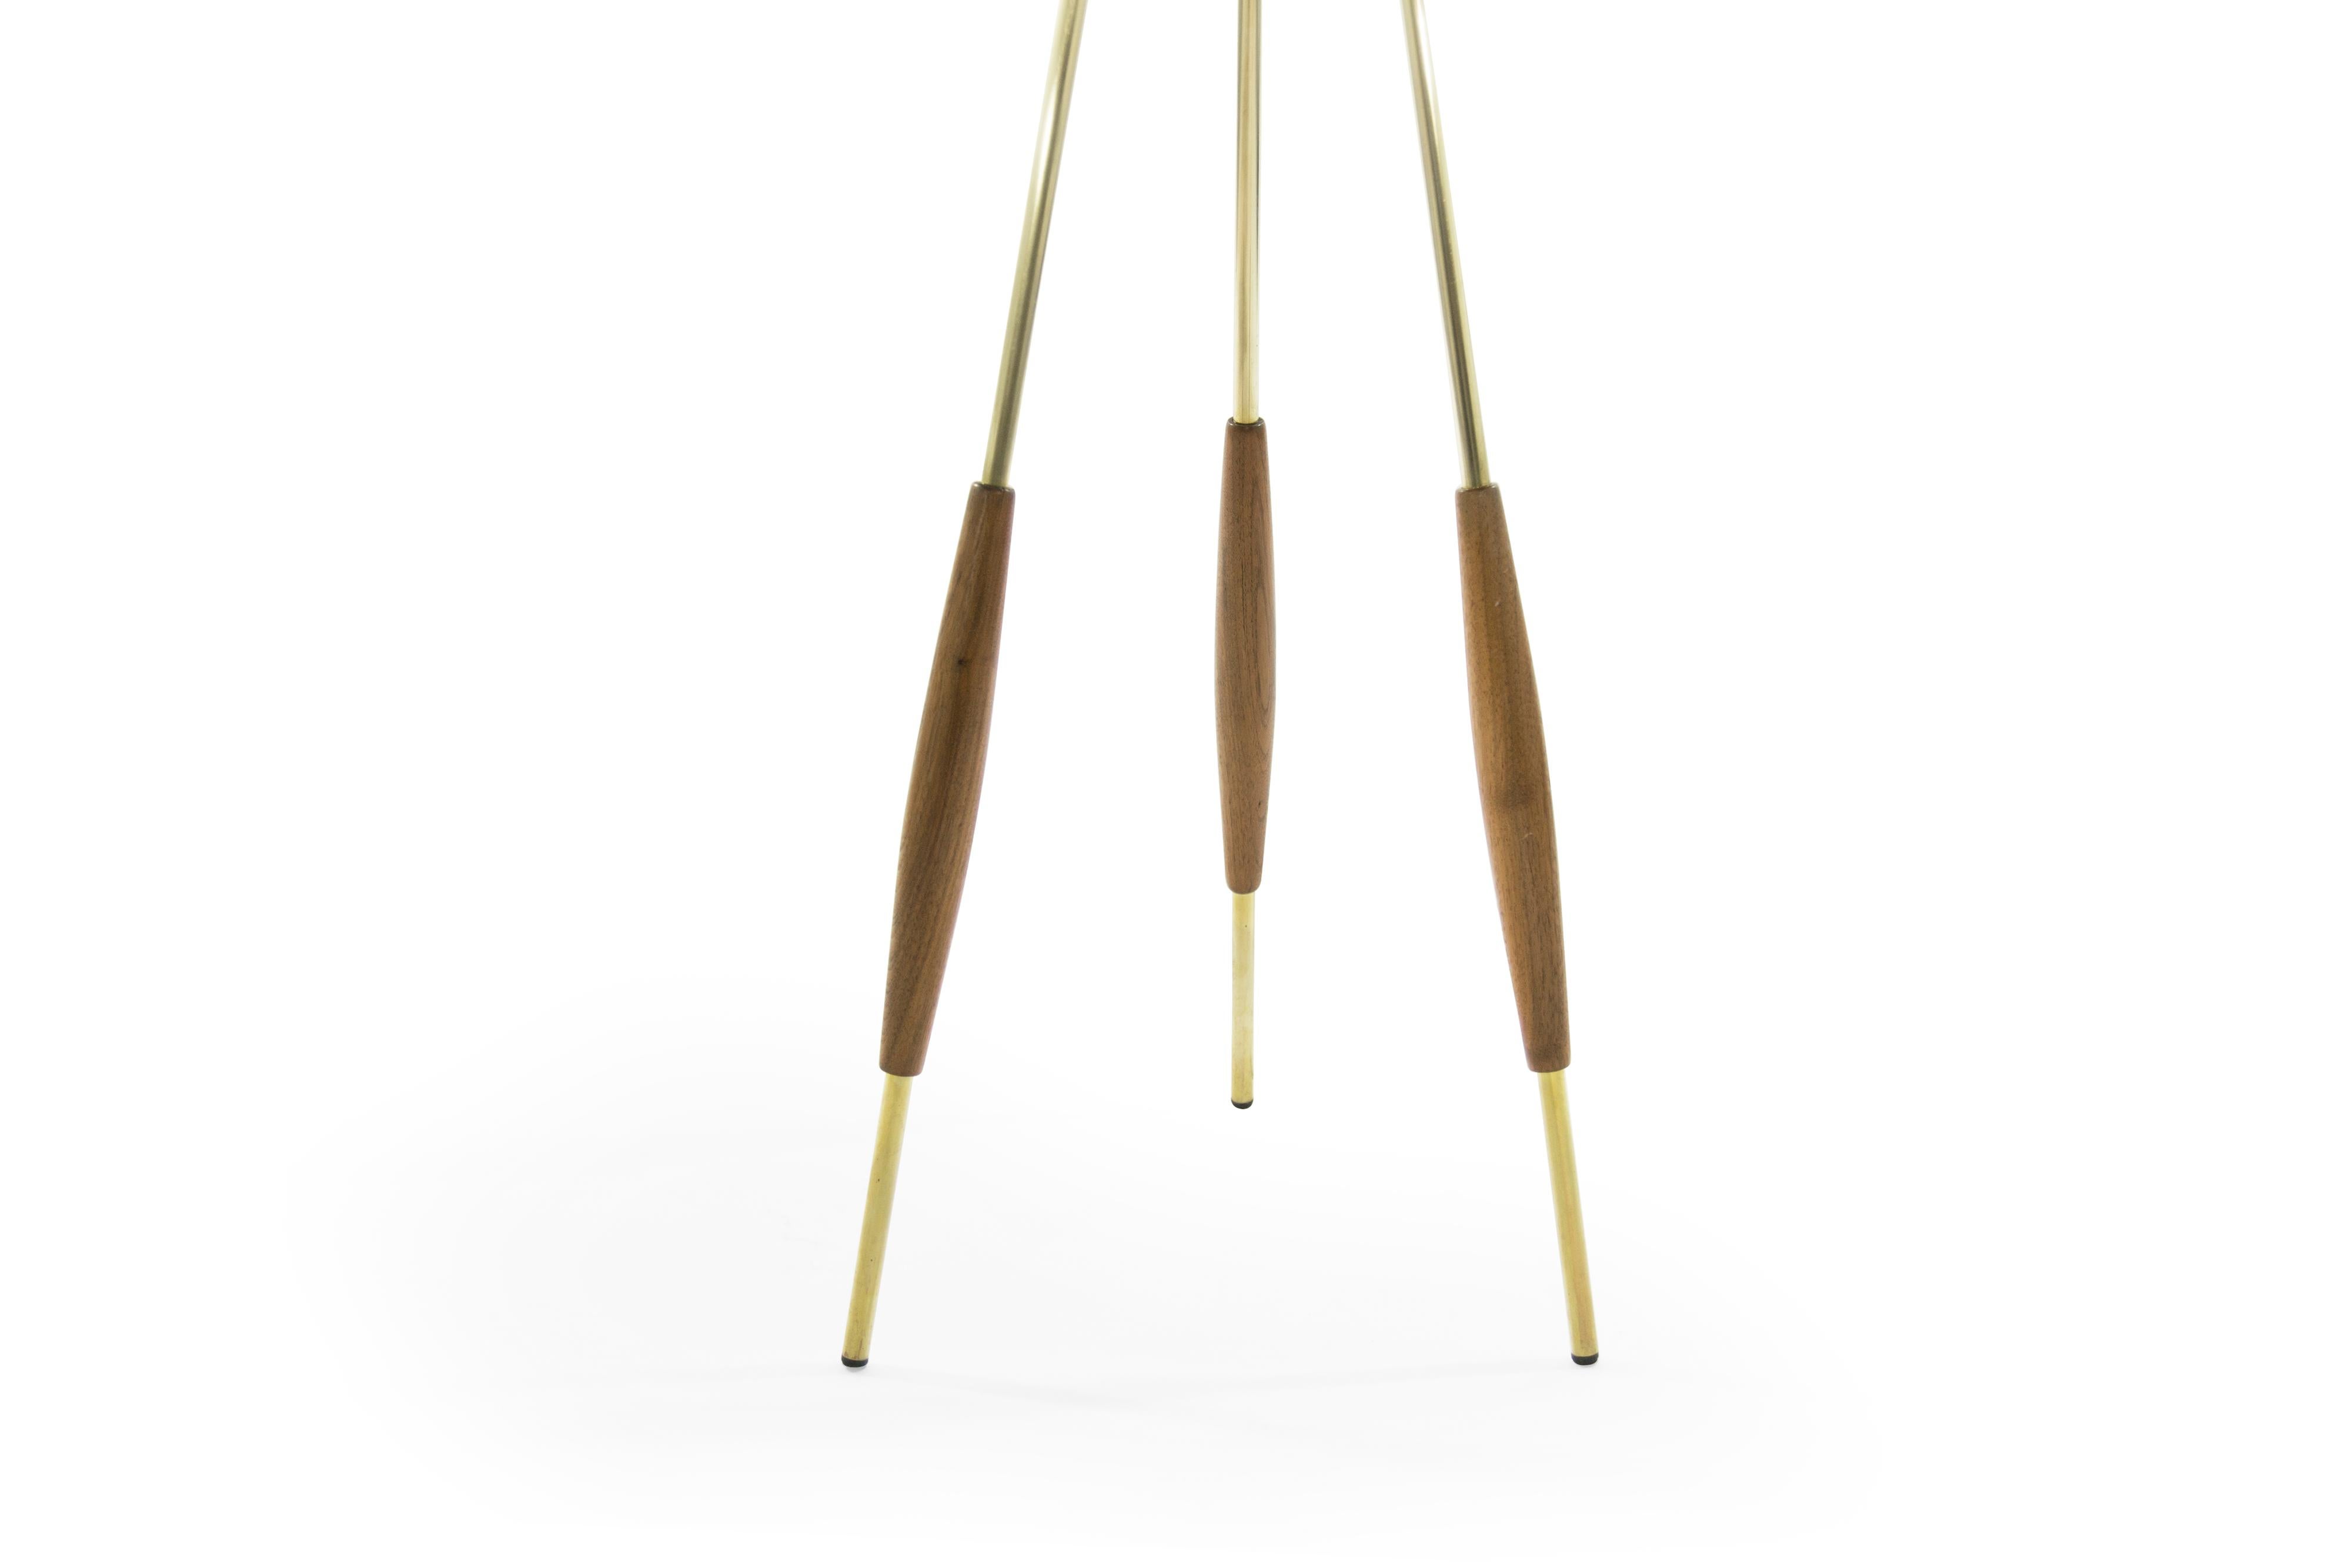 20th Century Pair of Brass and Walnut Tripod Floor Lamps by Gerald Thurston, 1960s